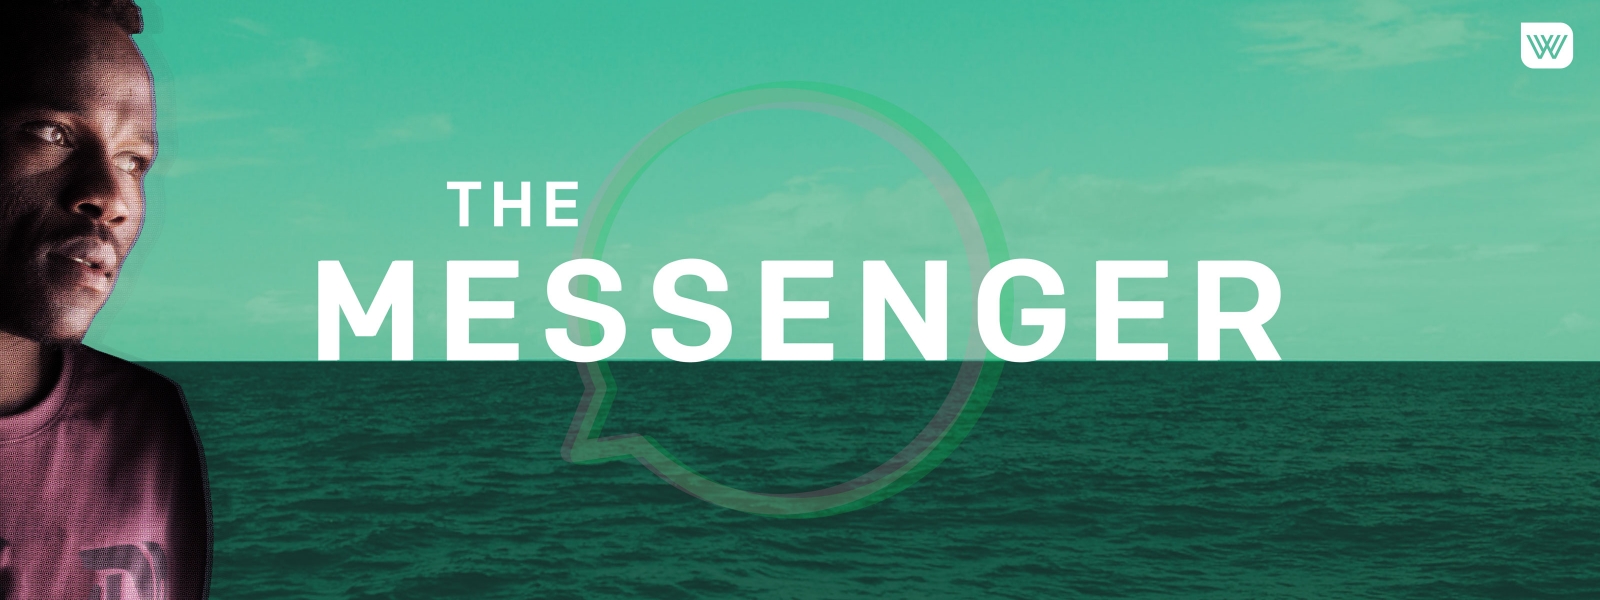 TheMessenger_podcast_behind_the_wire